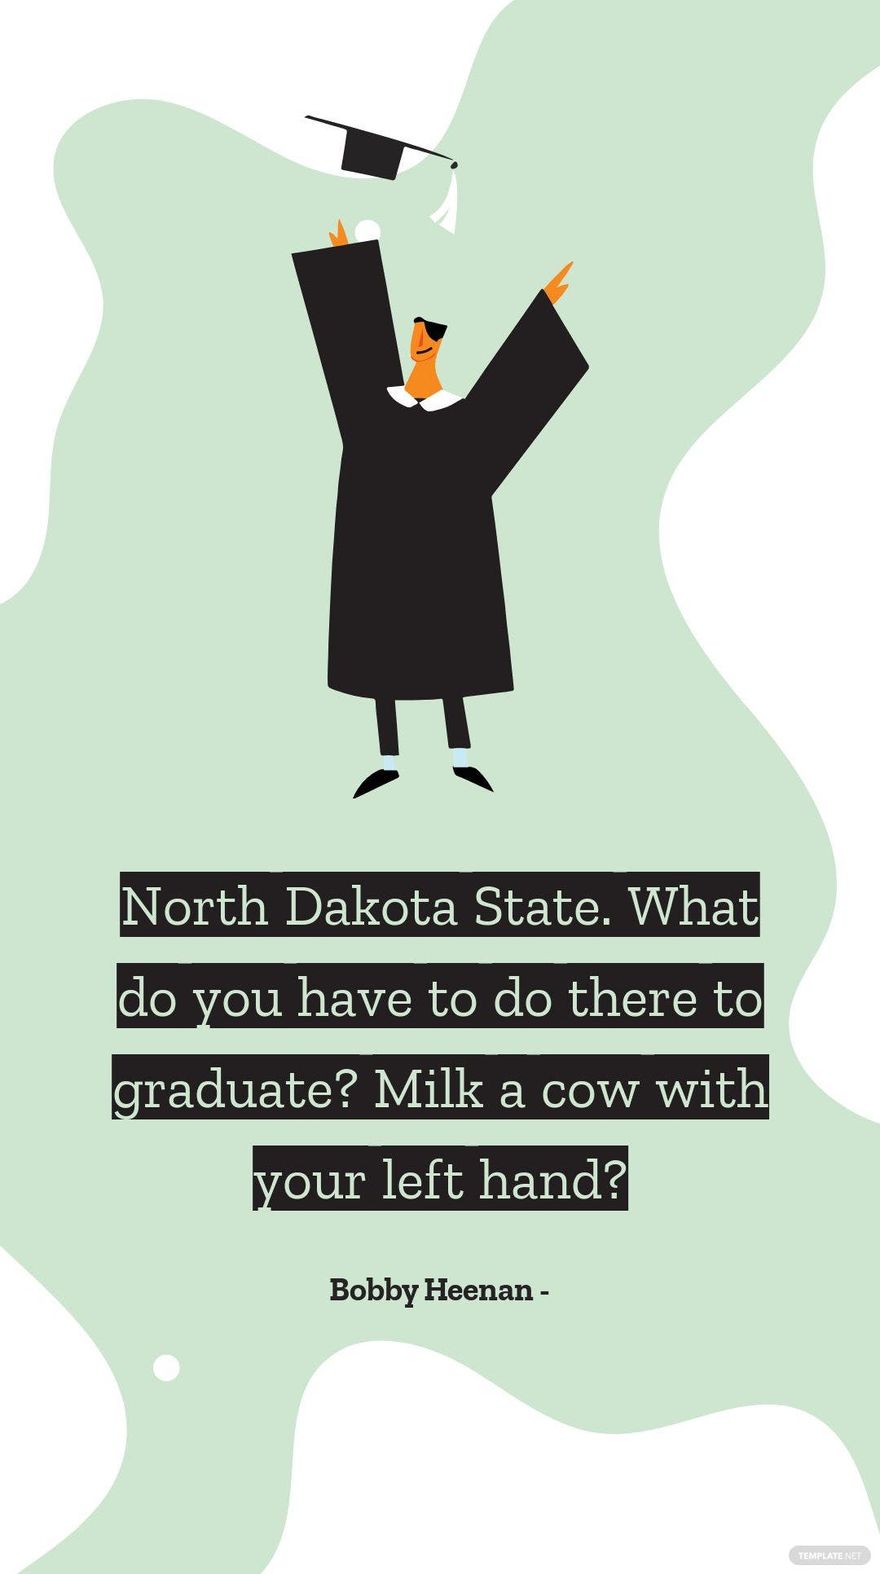 Free Bobby Heenan - North Dakota State. What do you have to do there to graduate? Milk a cow with your left hand? in JPG